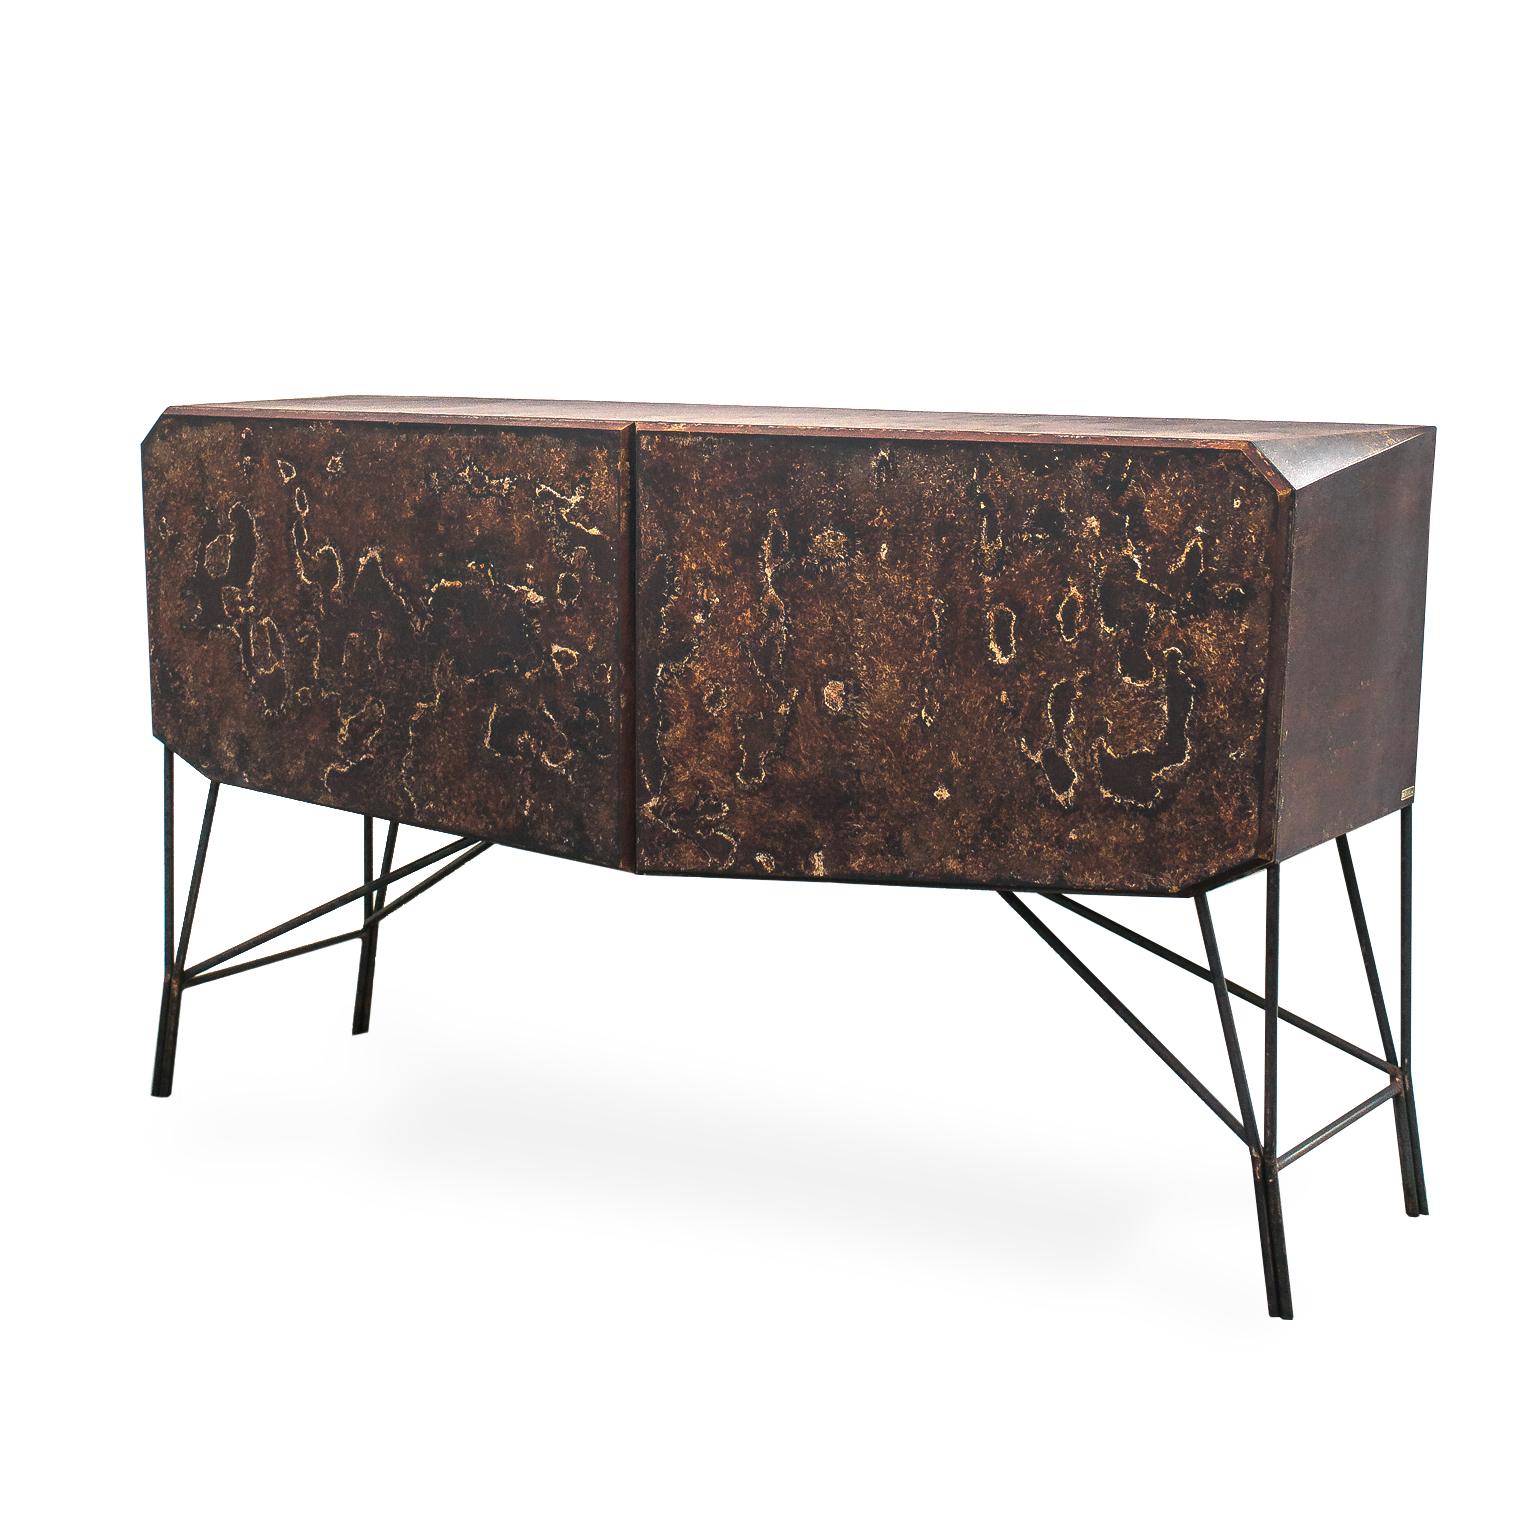 Brazilian Contemporary Rusty Buffet Triarm, Silver Wood Inside, Limited Edition  For Sale